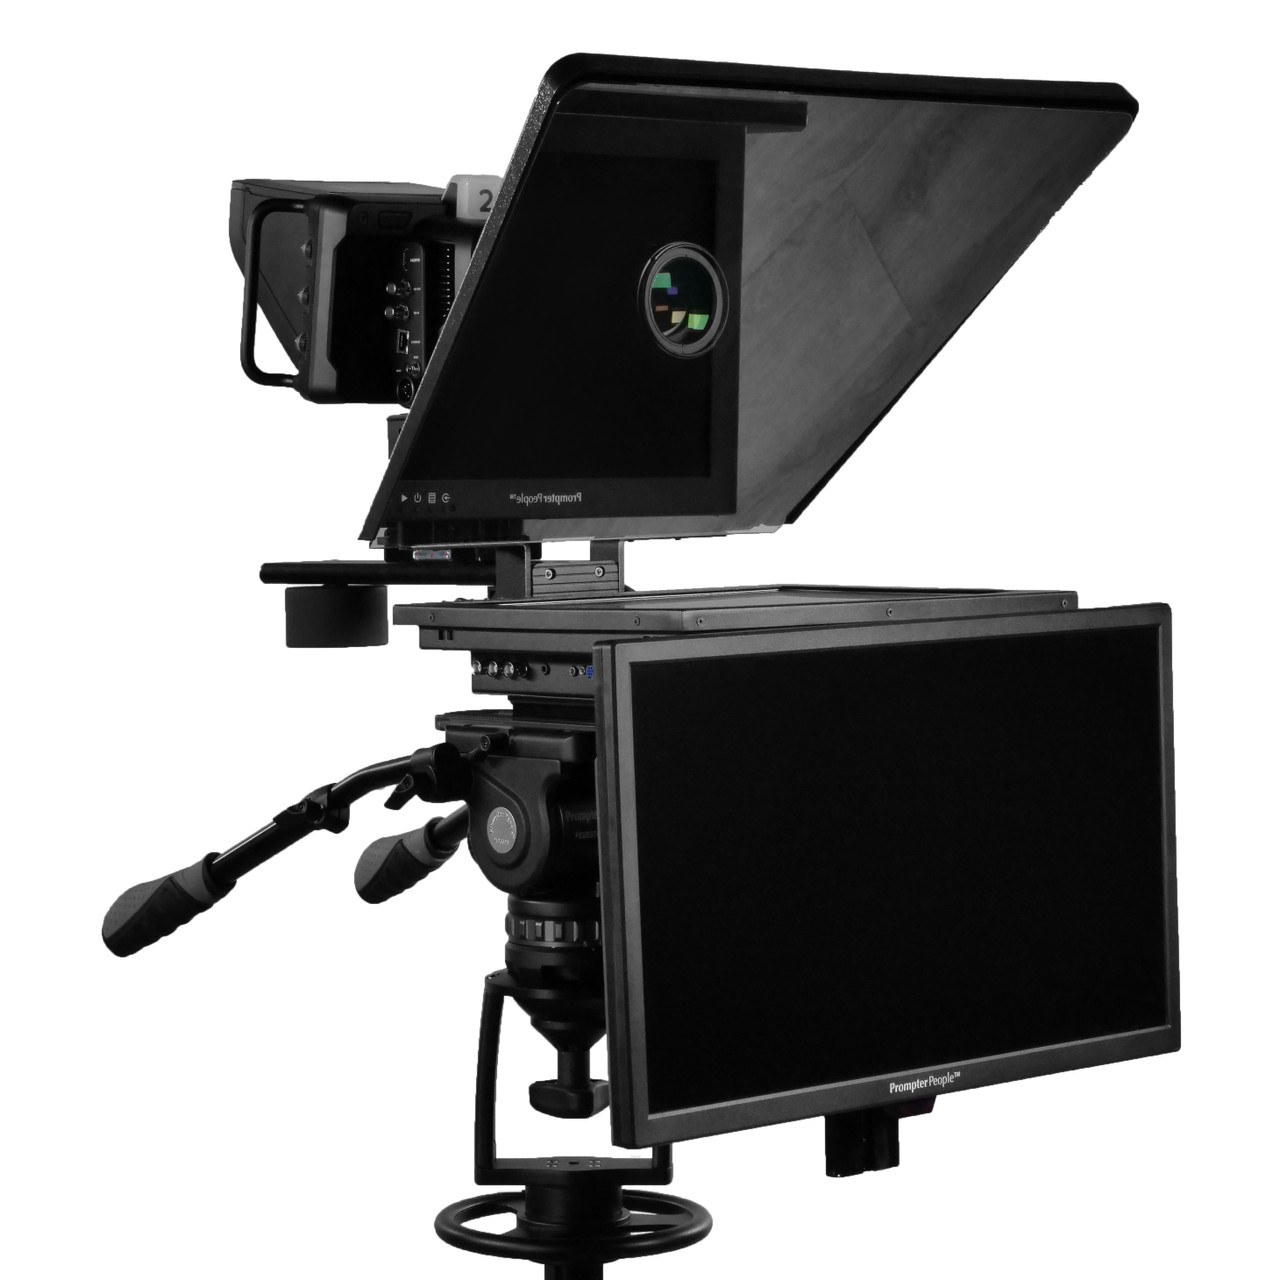 Flex Plus Talent Monitor Teleprompter | 15" 1000 NIT High Bright Prompting Monitor 3G-SDI | HDMI | VGA with 21.5" Color Accurate RGB IPS 3G-SDI Talent Monitor